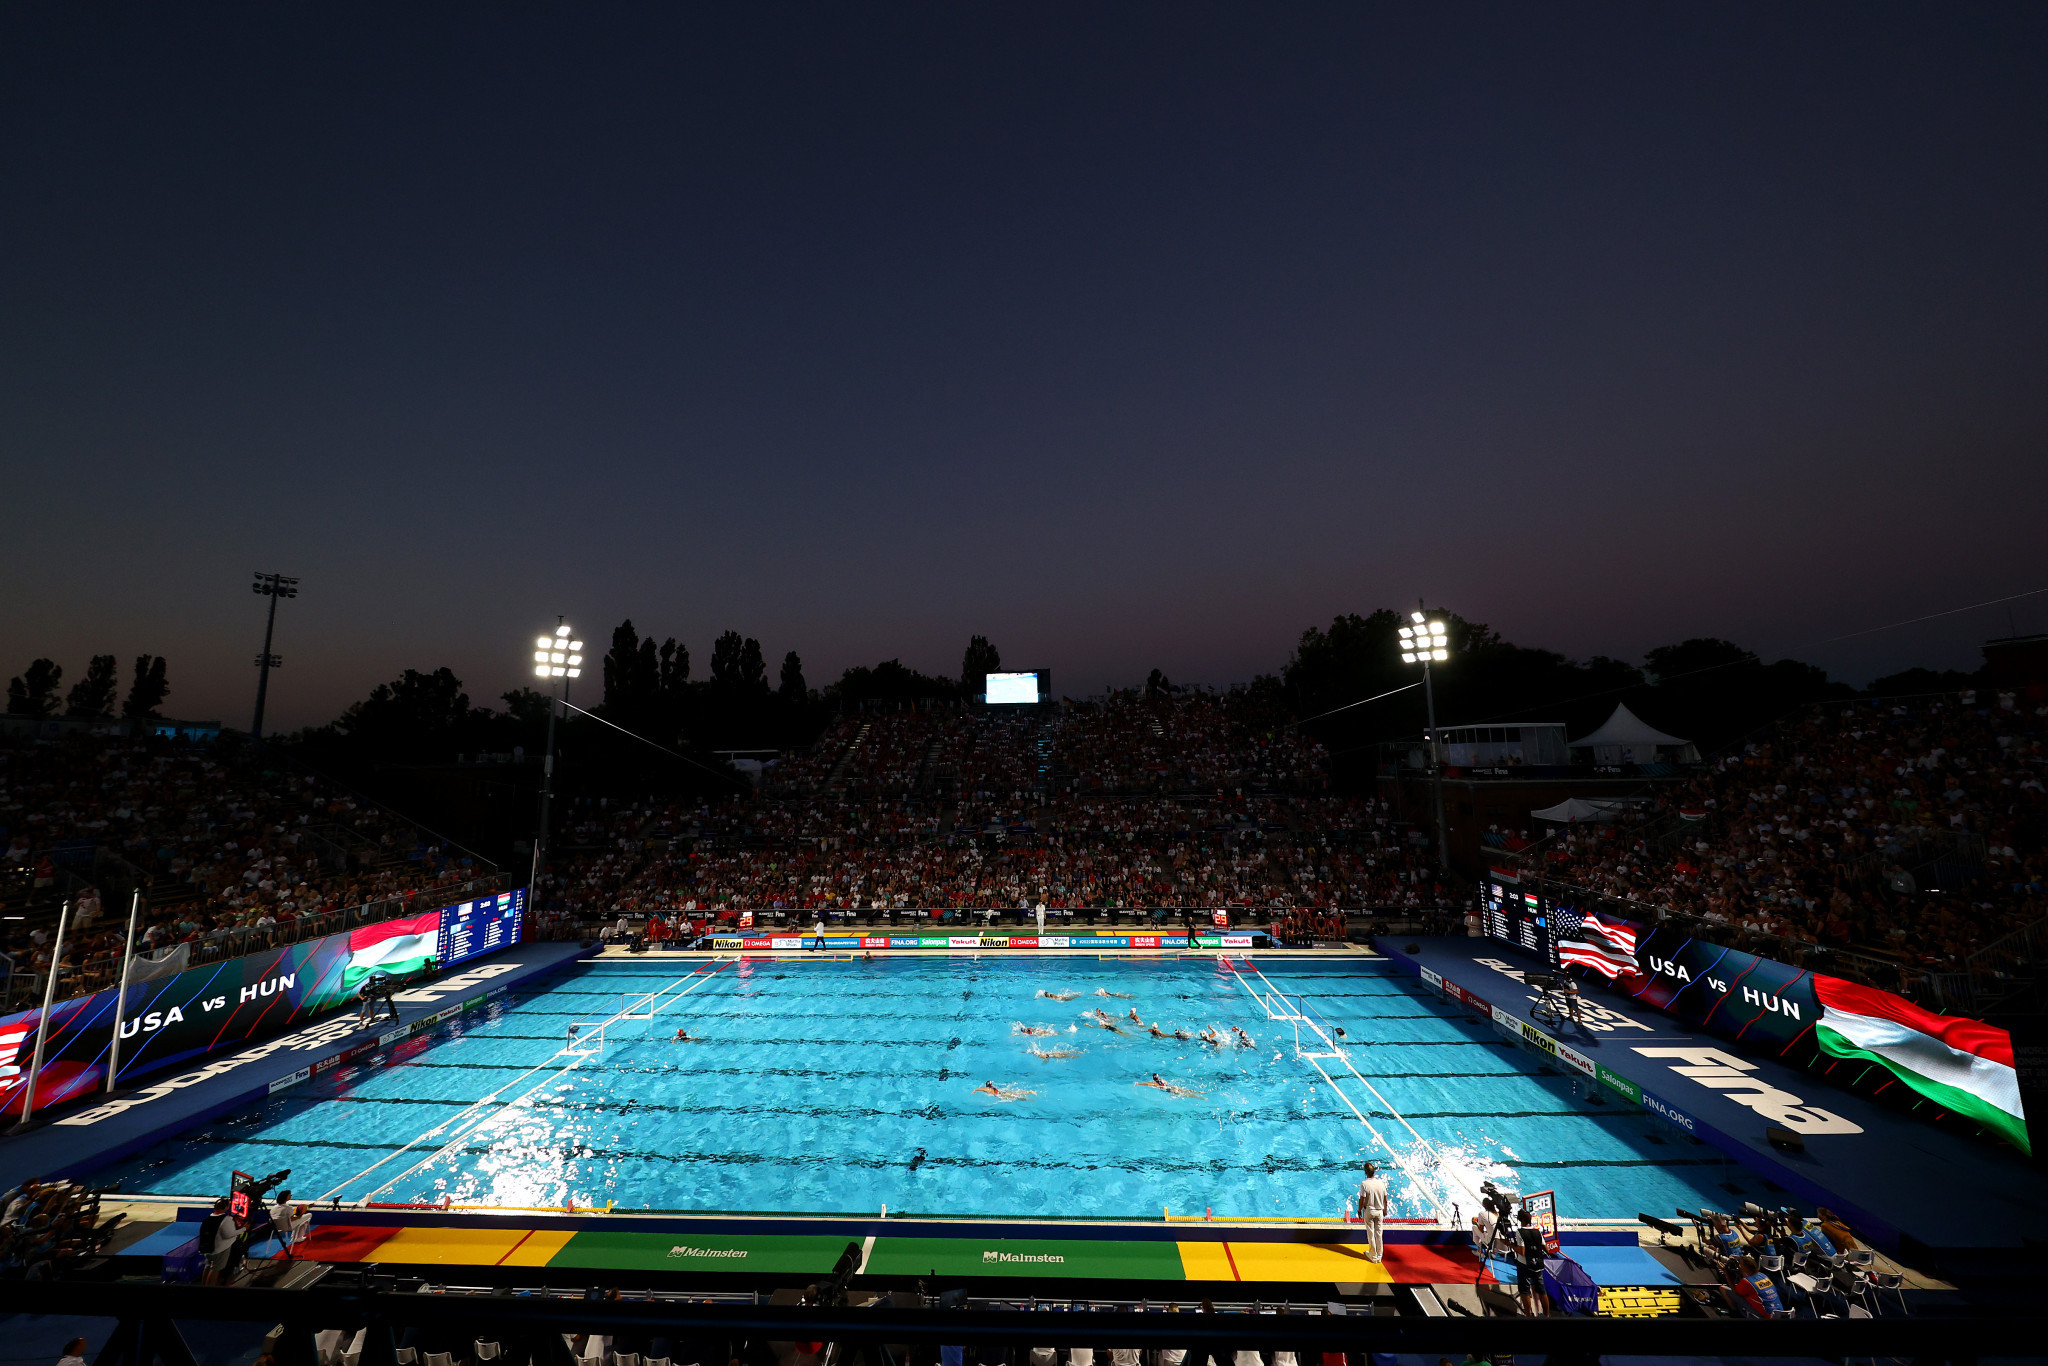 A passionate home crowd at the Alfréd Hajós National Swimming Stadium watched Hungary take on the United States in the women's water polo final ©Getty Images